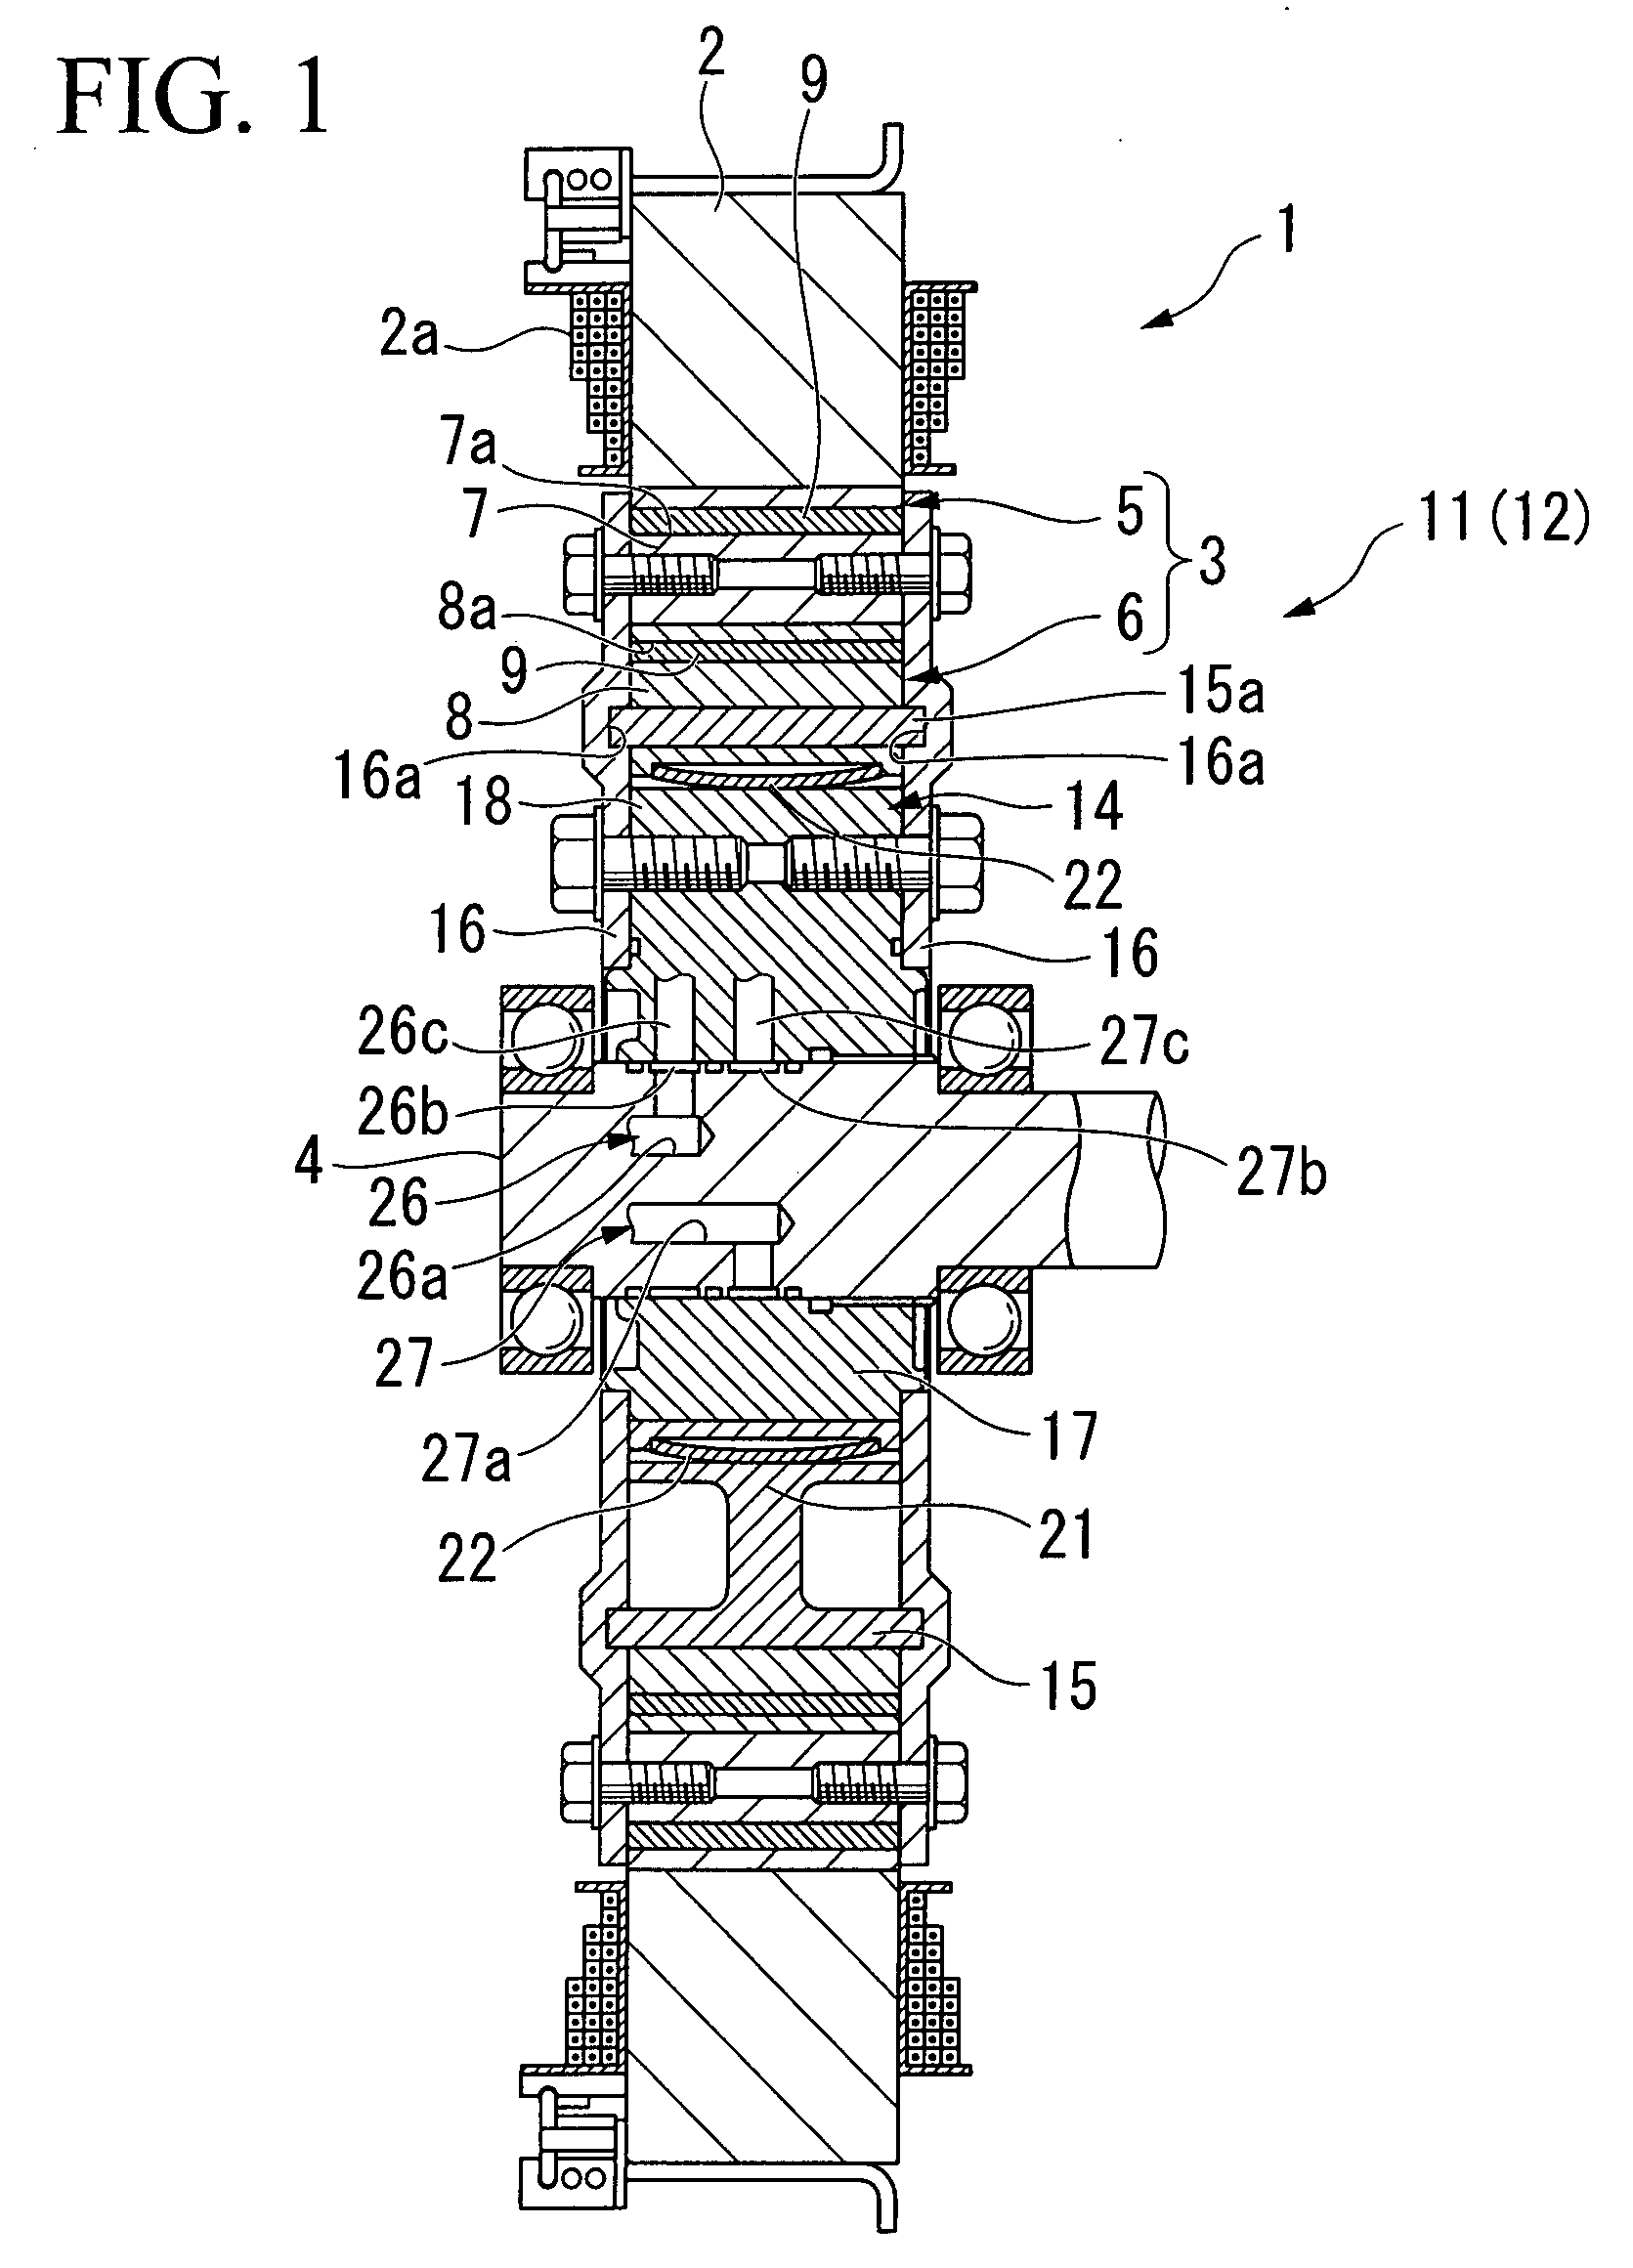 Motor using working fluid distributed into chambers, which are provided for rotating rotors in opposite relative rotation directions